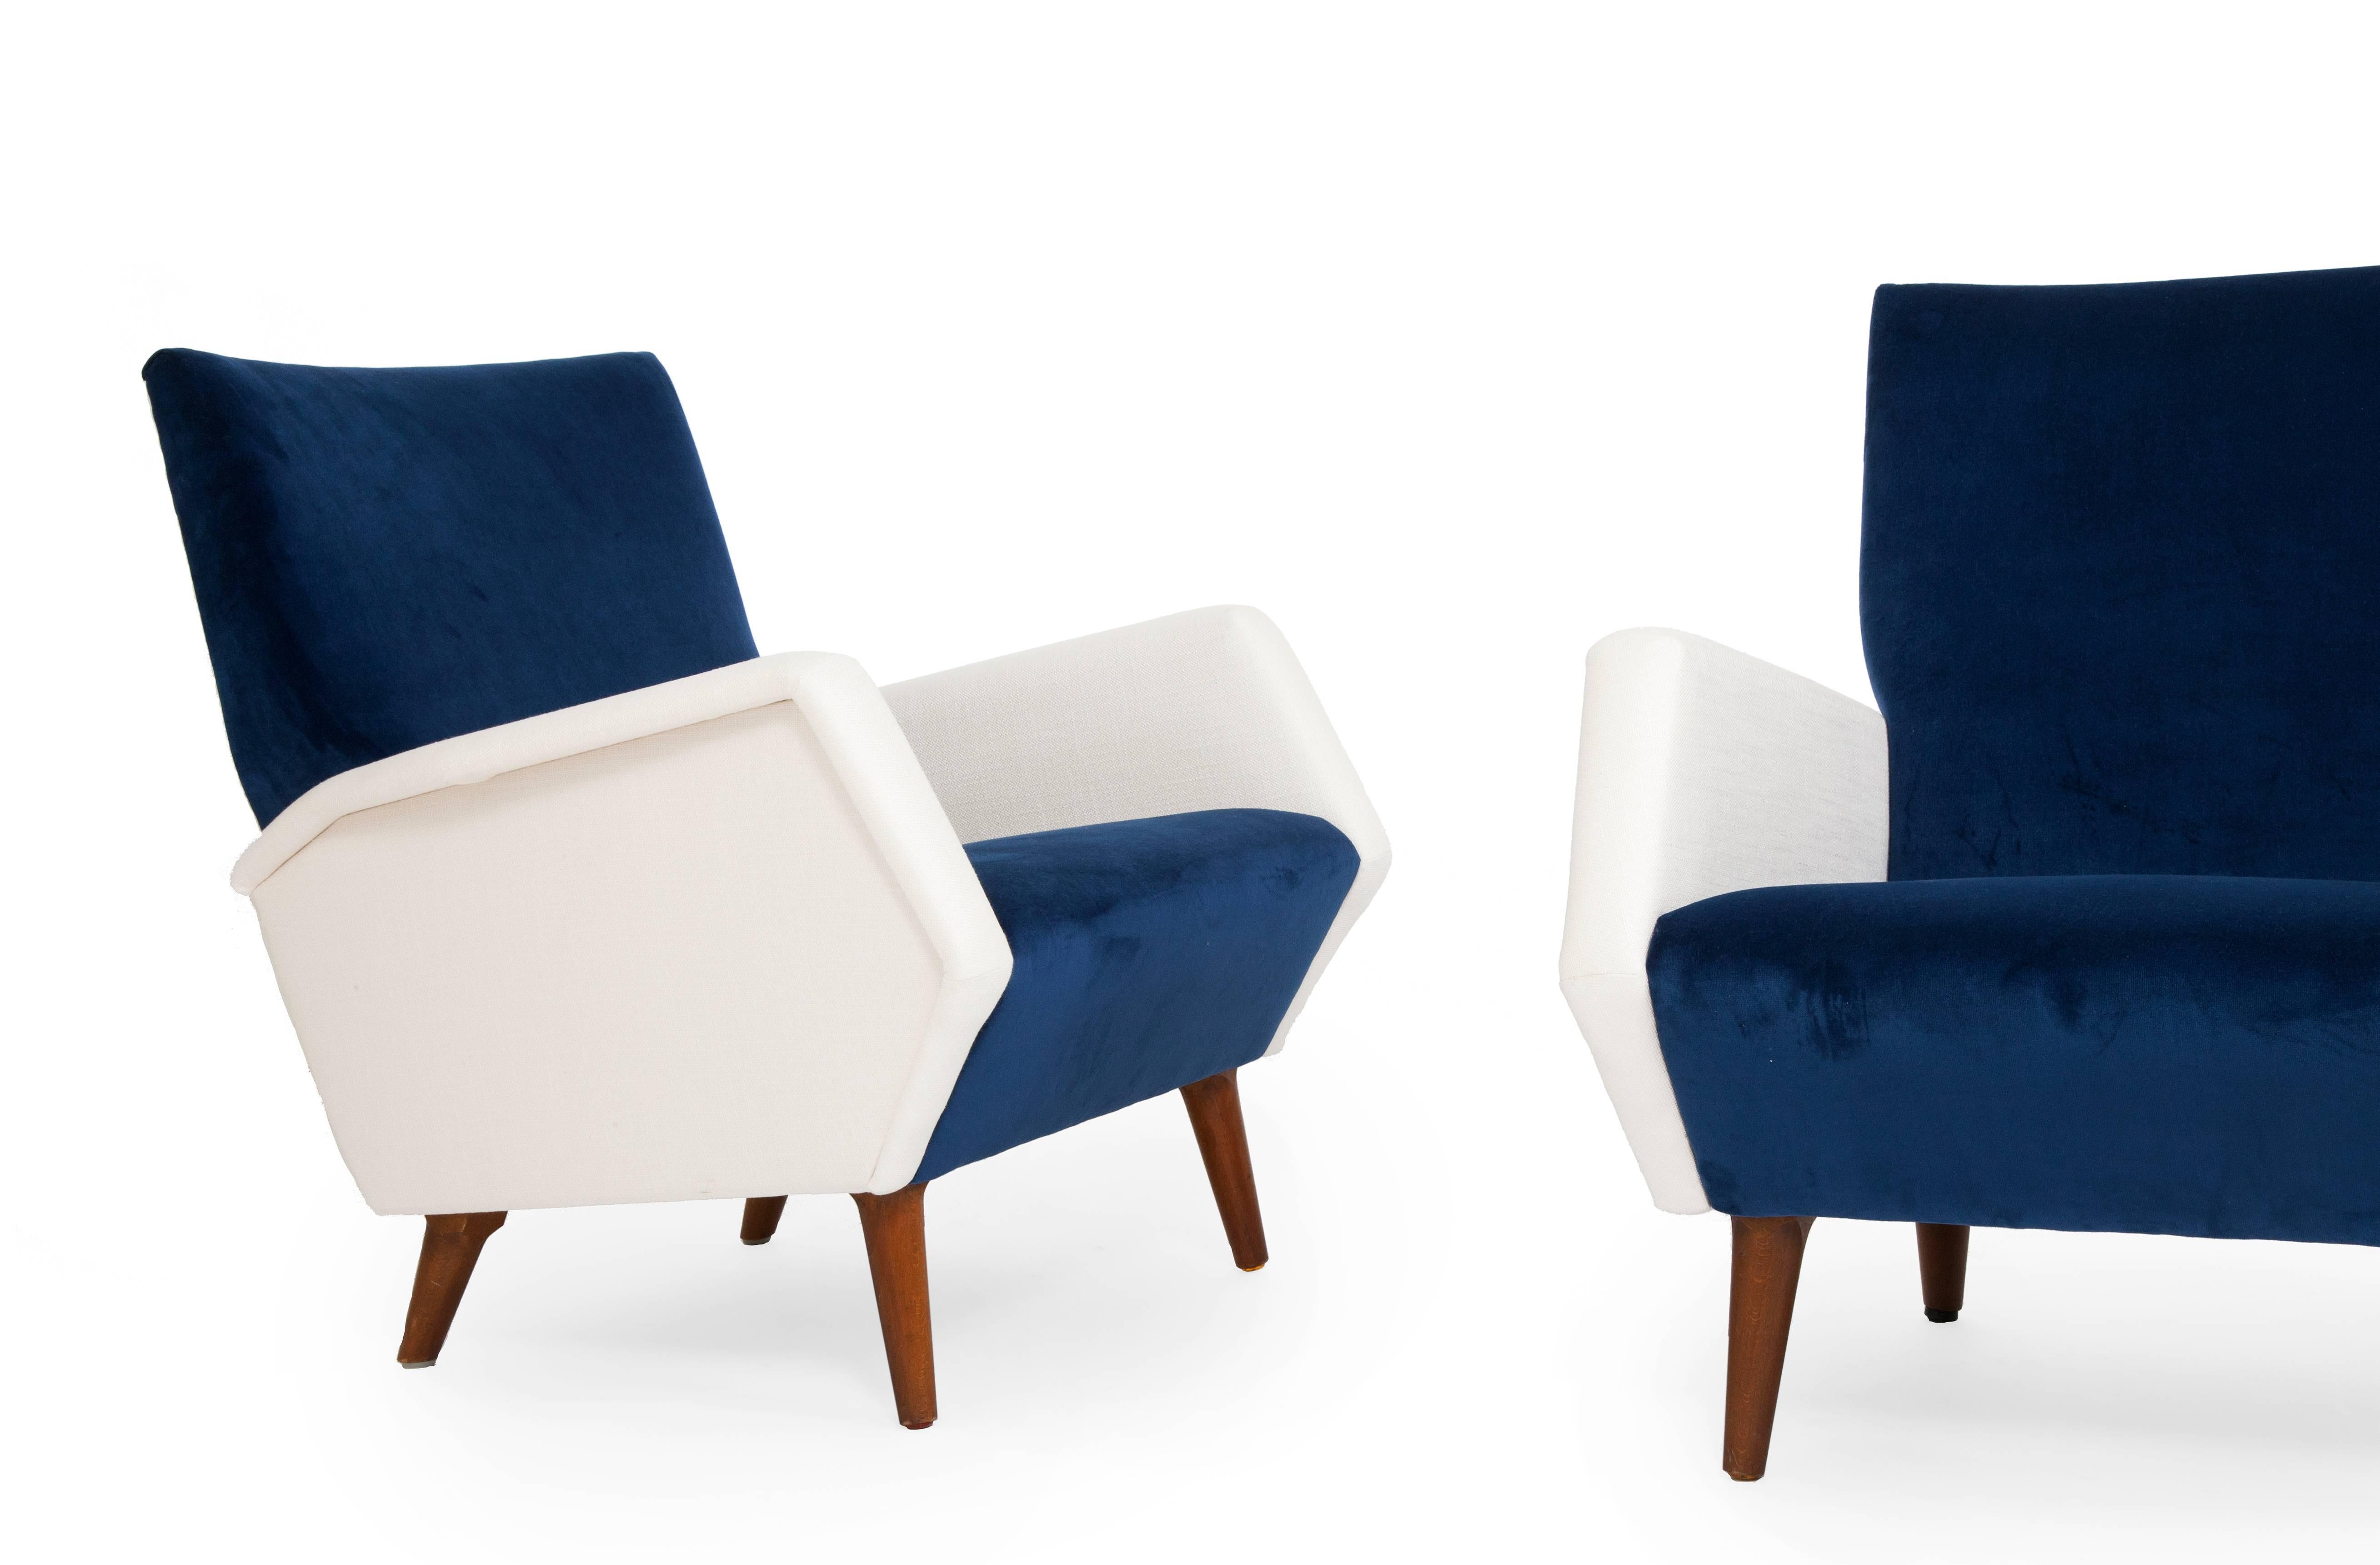 Pair of armchairs designed by Gio Ponti and produced by Cassina, catalog number 803. Italy, 1960s. Sold with a certificate of authenticity from the Gio Ponti archives.